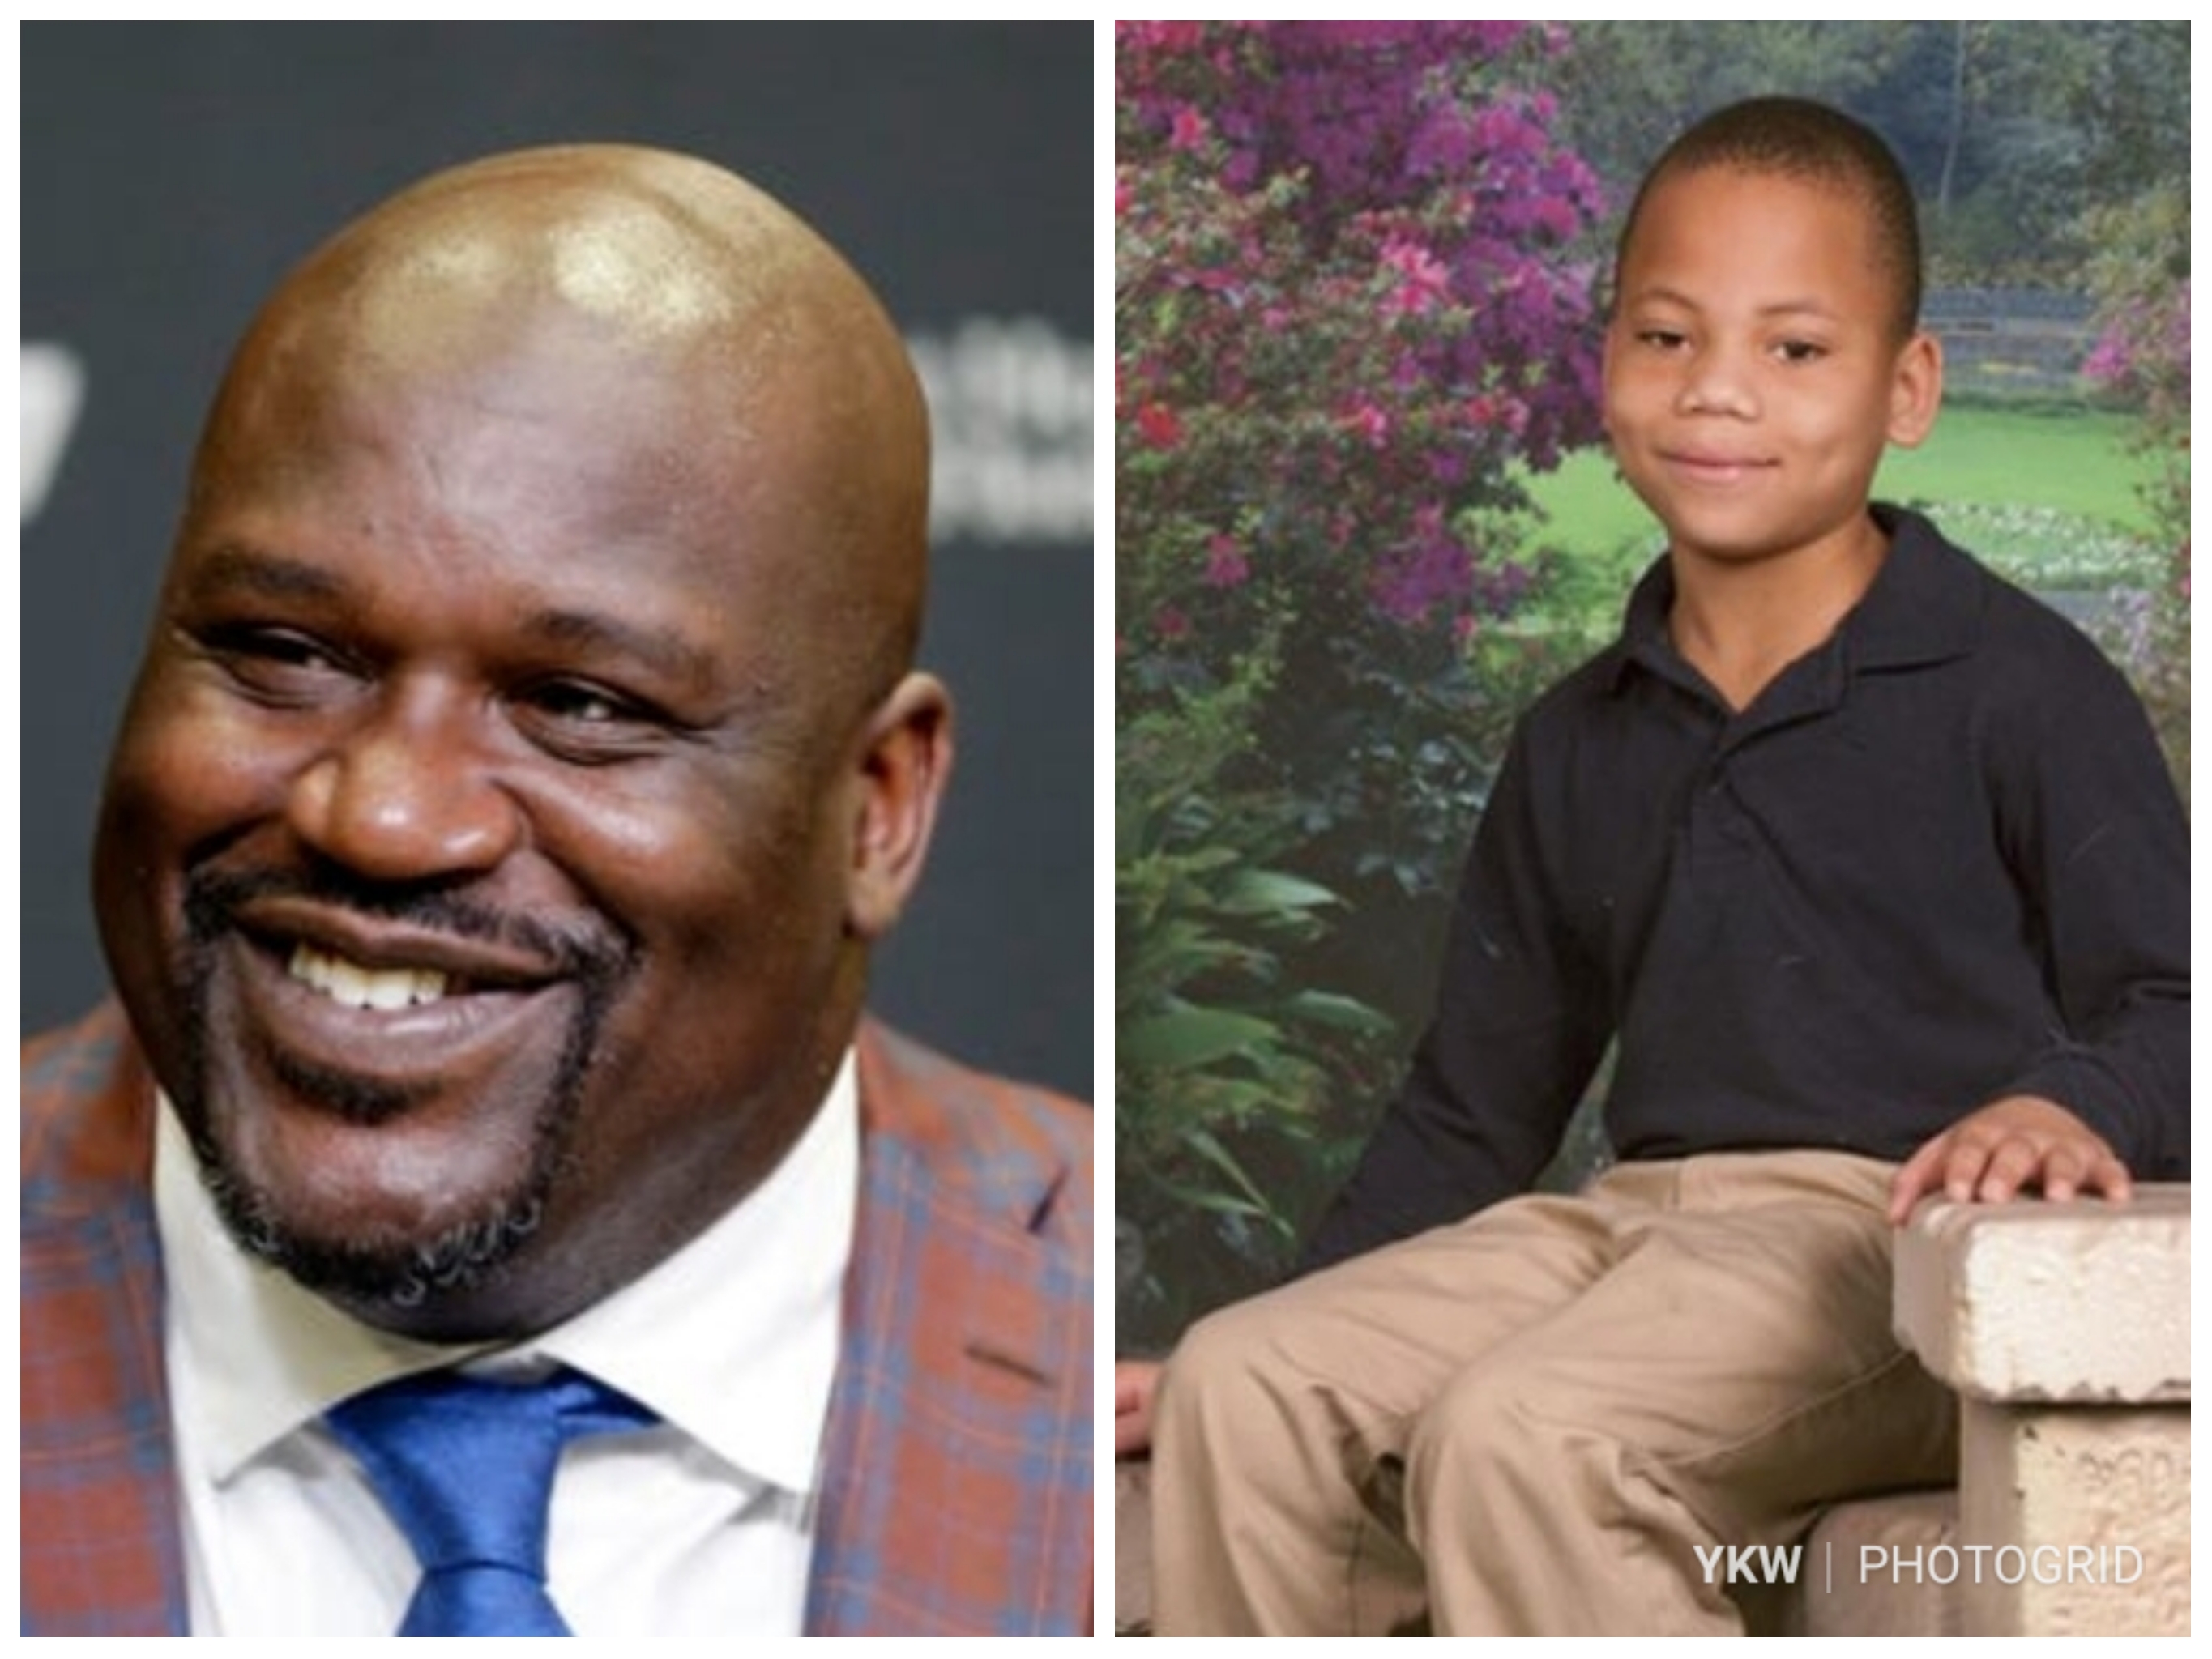 Shaq Pays A Year’s Rent For Family Of 12-Year Old Boy Paralyzed In Football Game Shooting